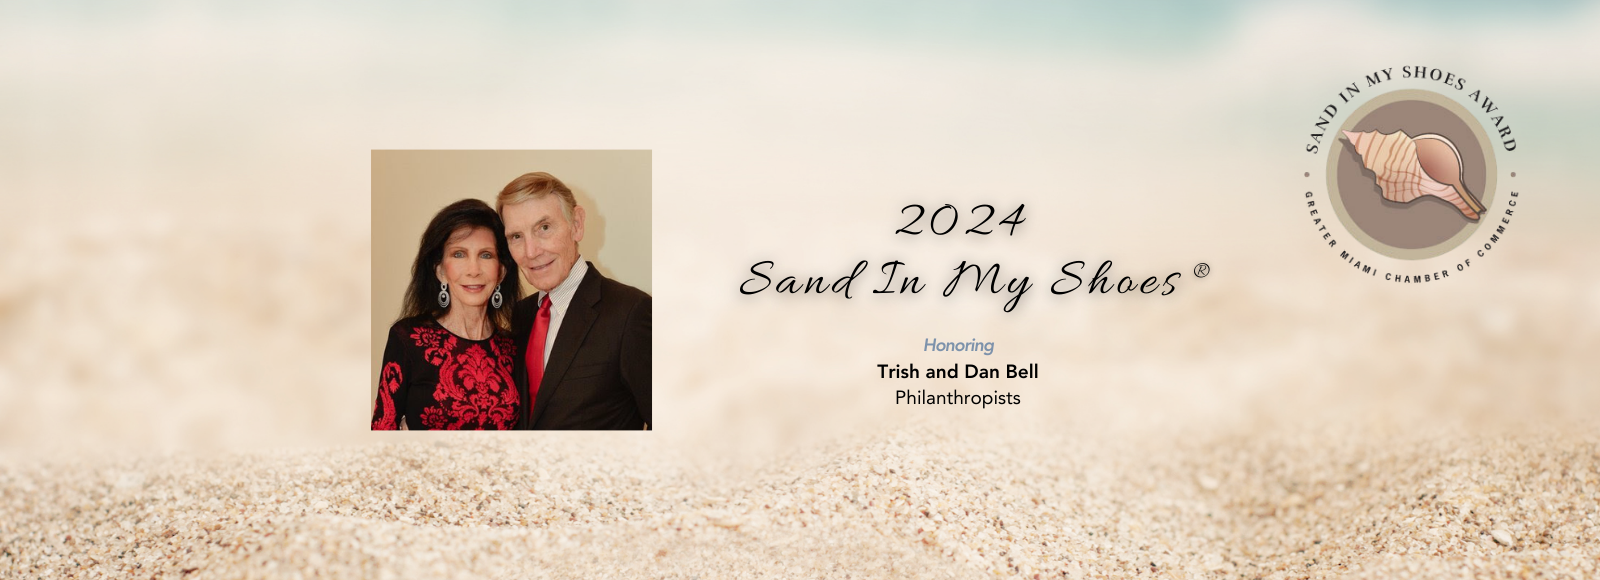 2024 Sand In My Shoes®  Award